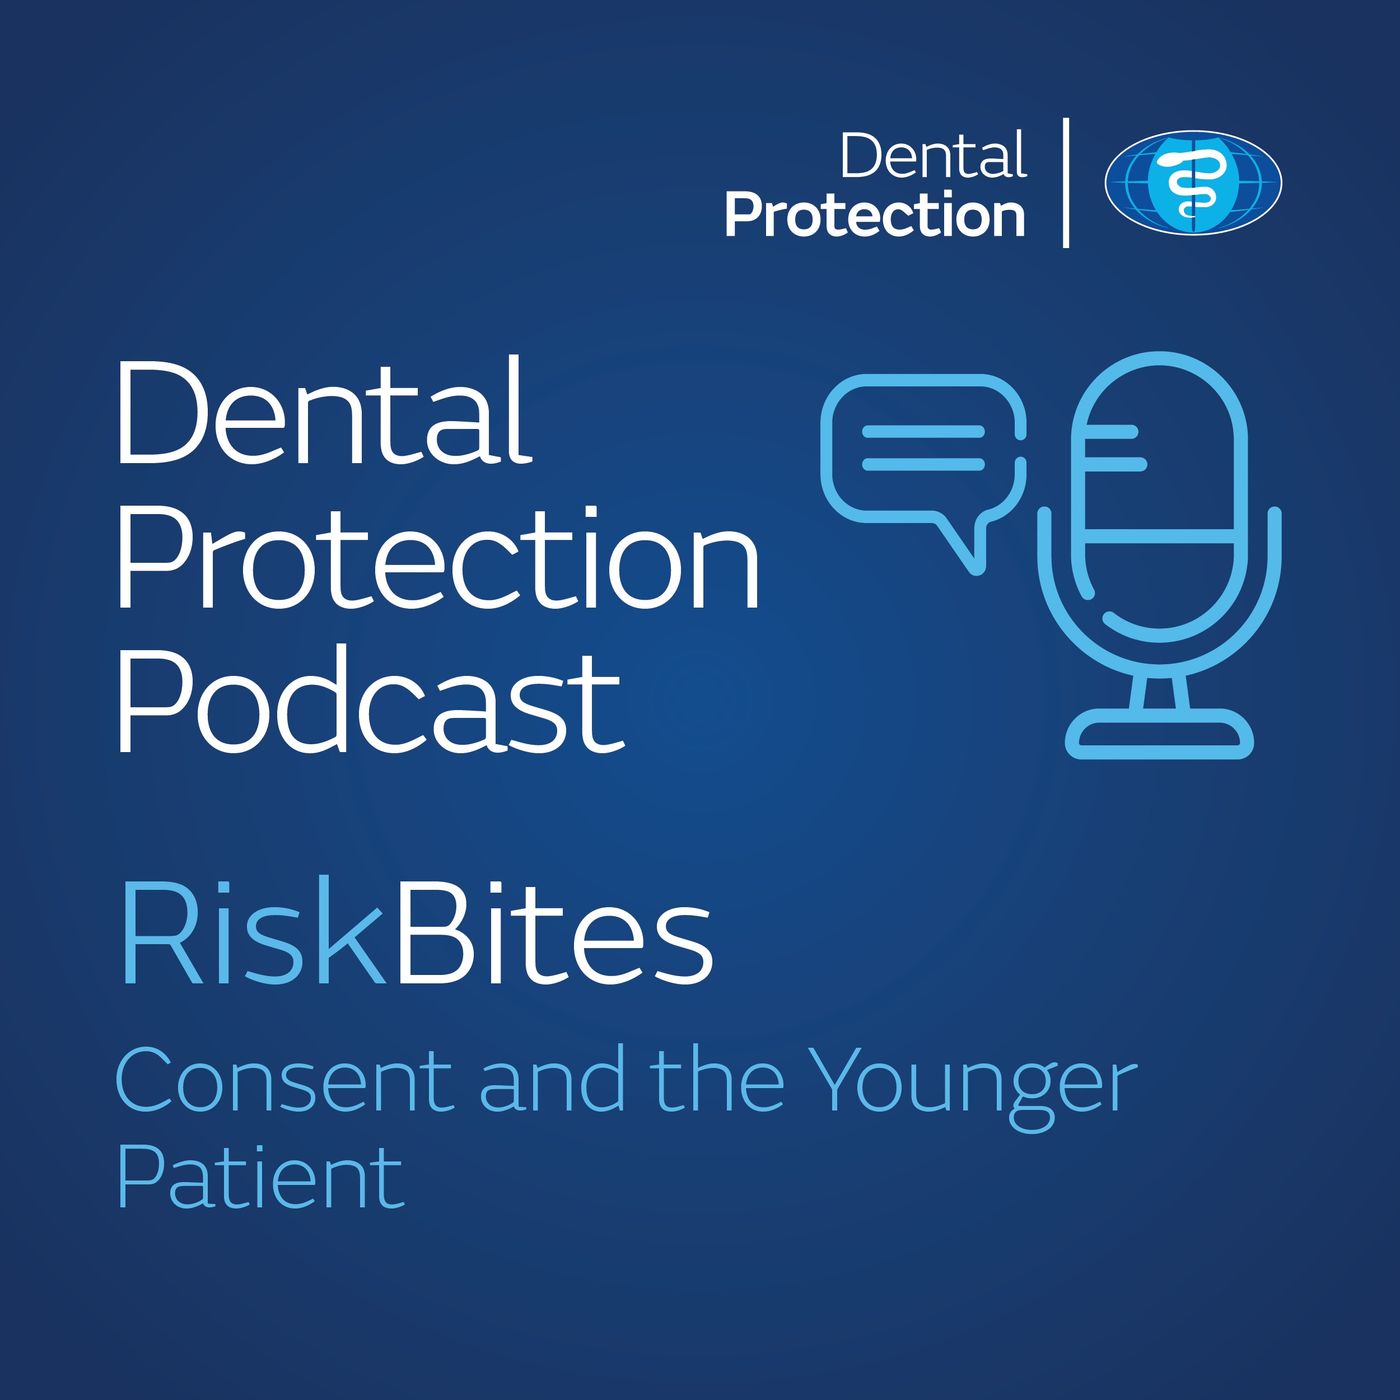 RiskBites: Consent and the Younger Patient